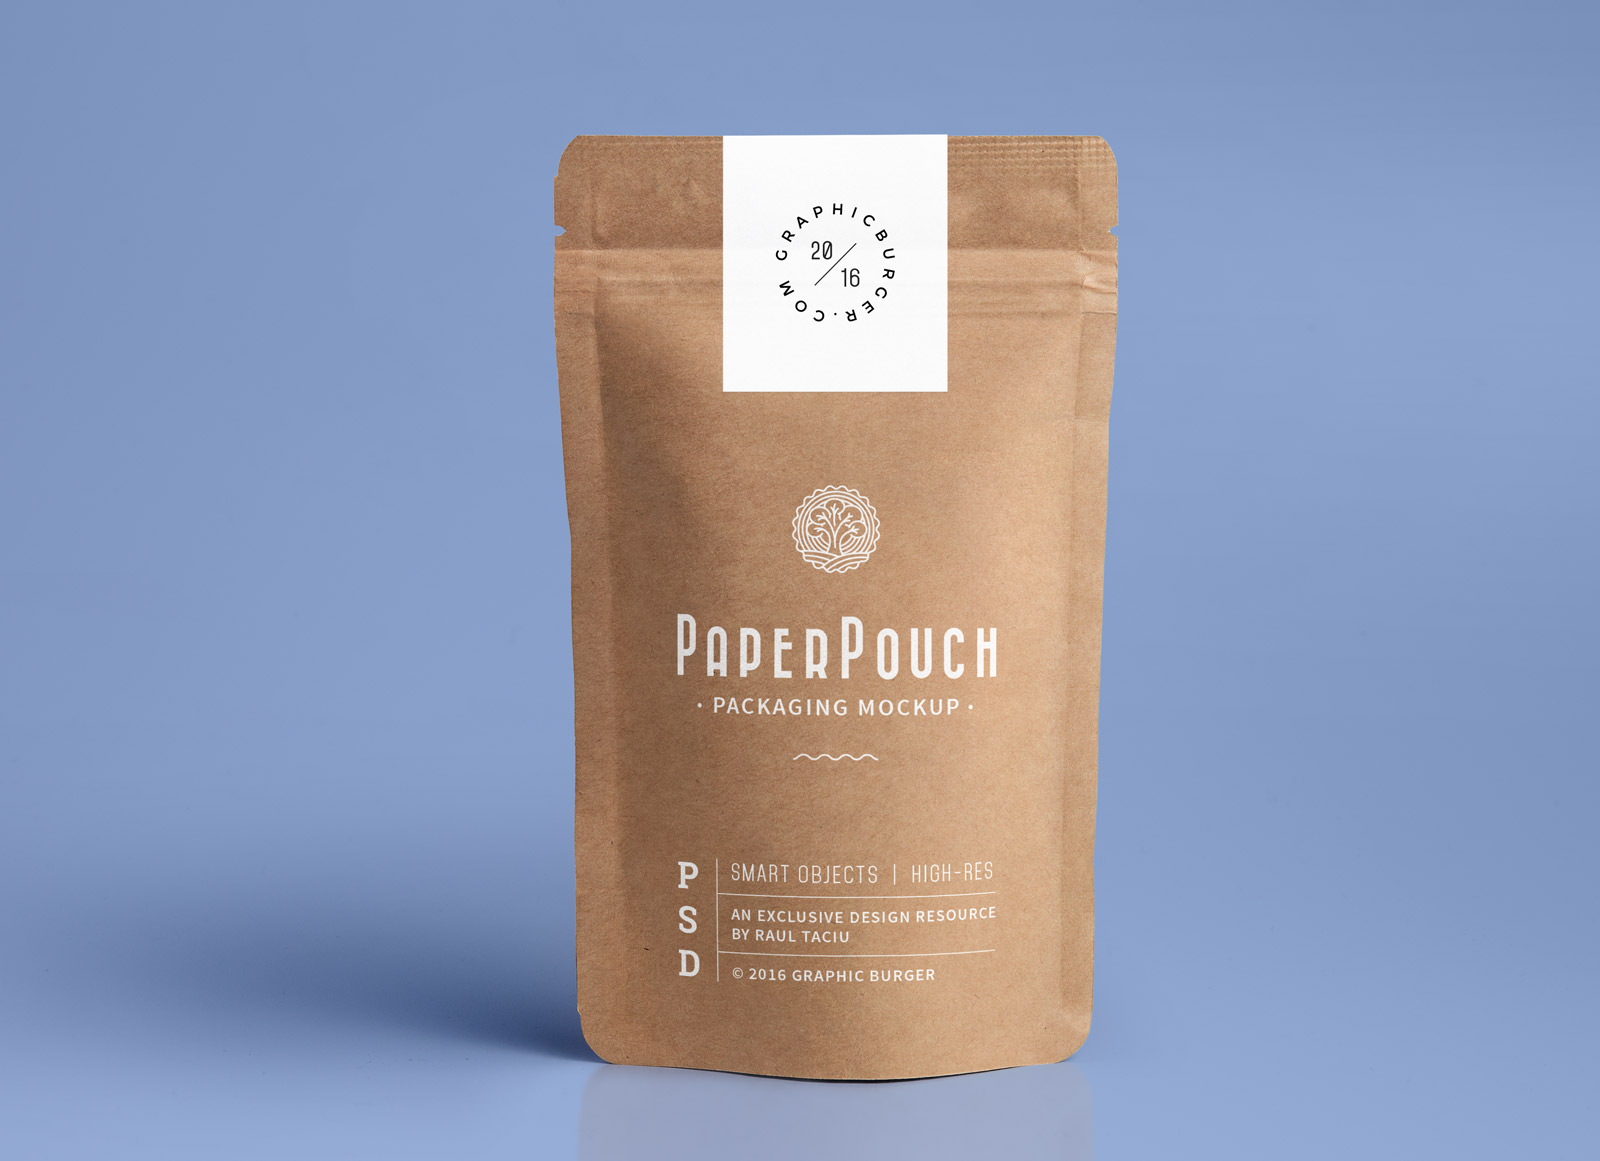 Standing Paper Pouch Packaging Mockup